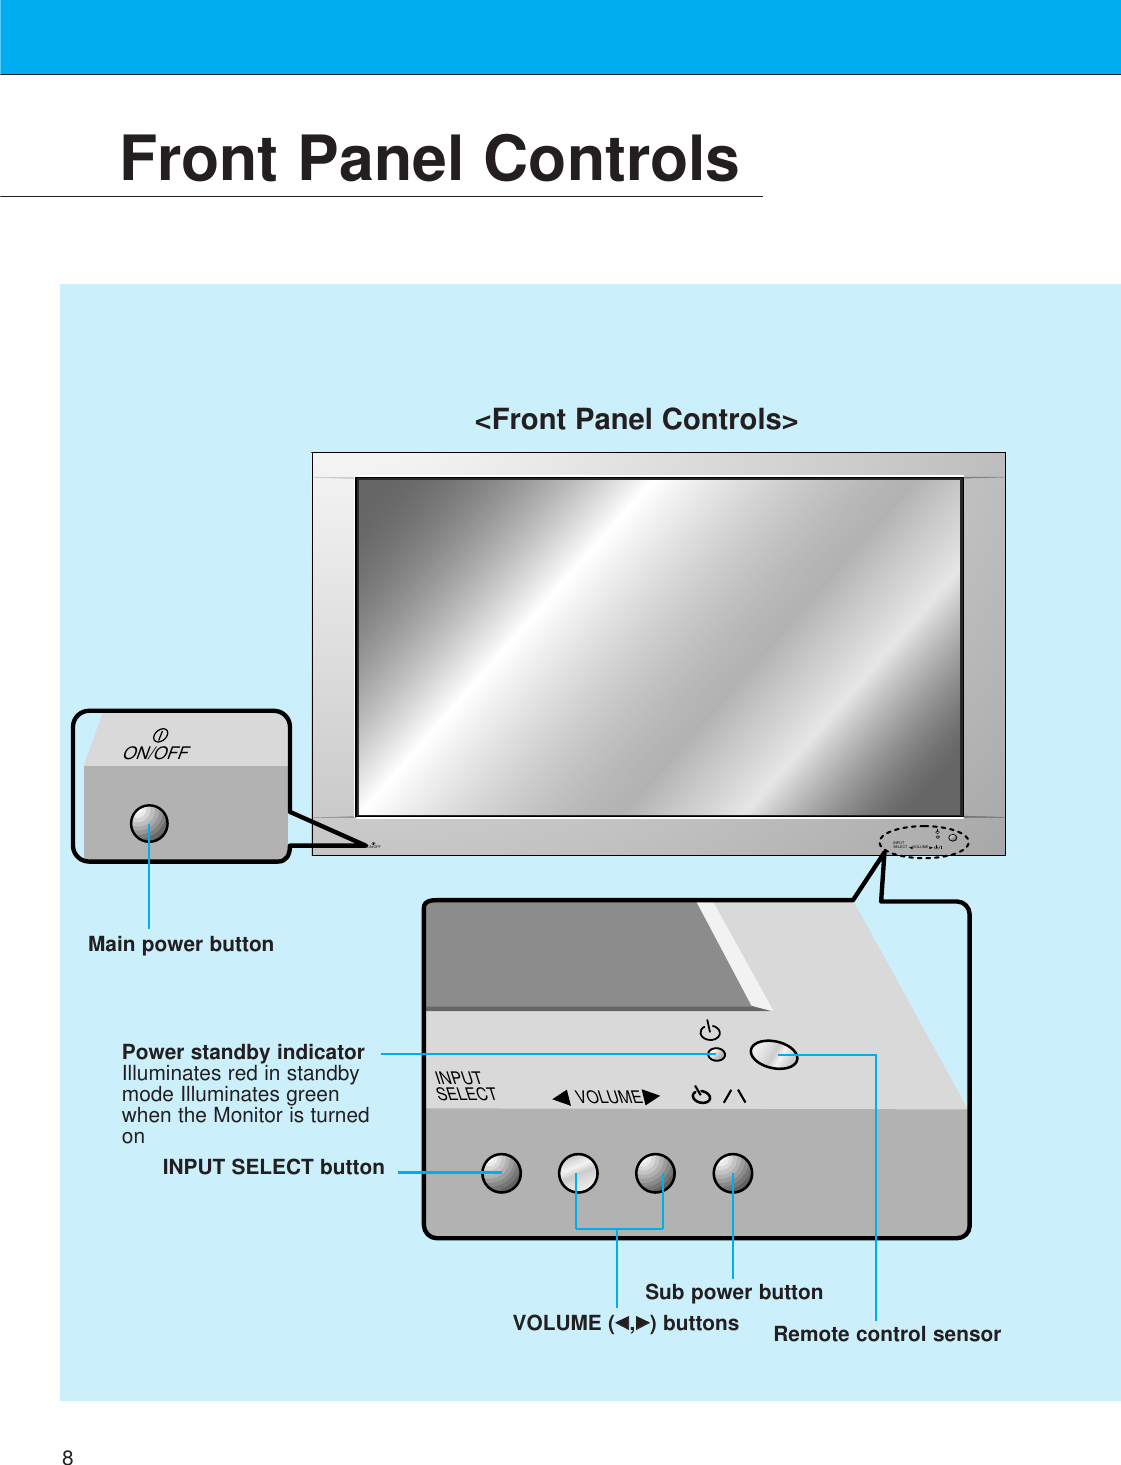 8Front Panel ControlsON/OFFON/OFF INPUT SELECT VOLUME INPUT SELECT VOLUME&lt;Front Panel Controls&gt;Main power buttonINPUT SELECT buttonPower standby indicatorIlluminates red in standbymode Illuminates greenwhen the Monitor is turnedonSub power buttonVOLUME (FF,GG) buttons Remote control sensor